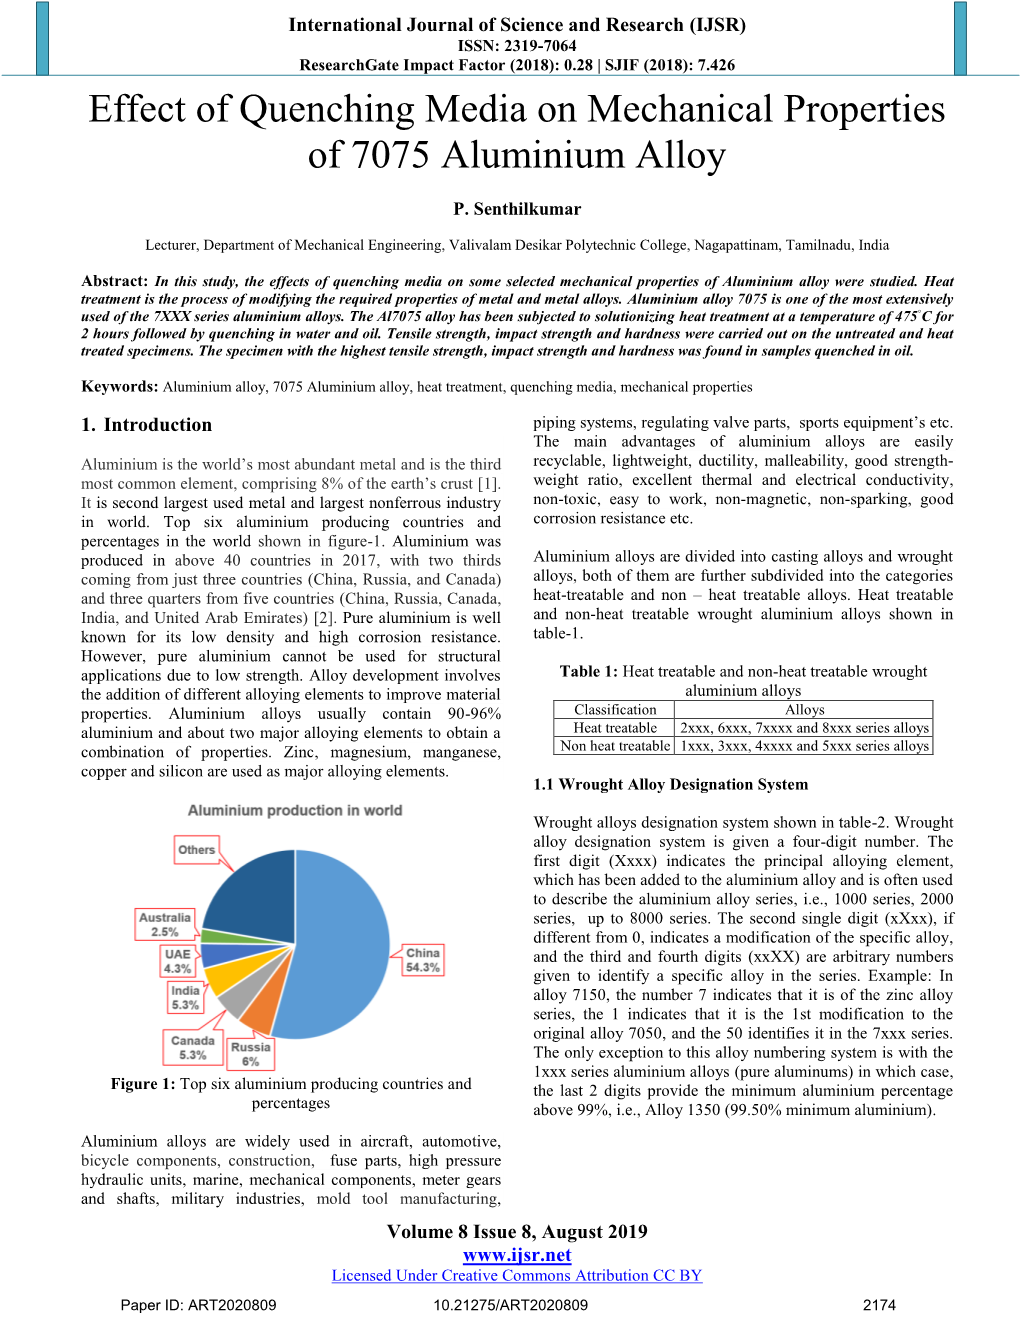 Effect of Quenching Media on Mechanical Properties of 7075 Aluminium Alloy